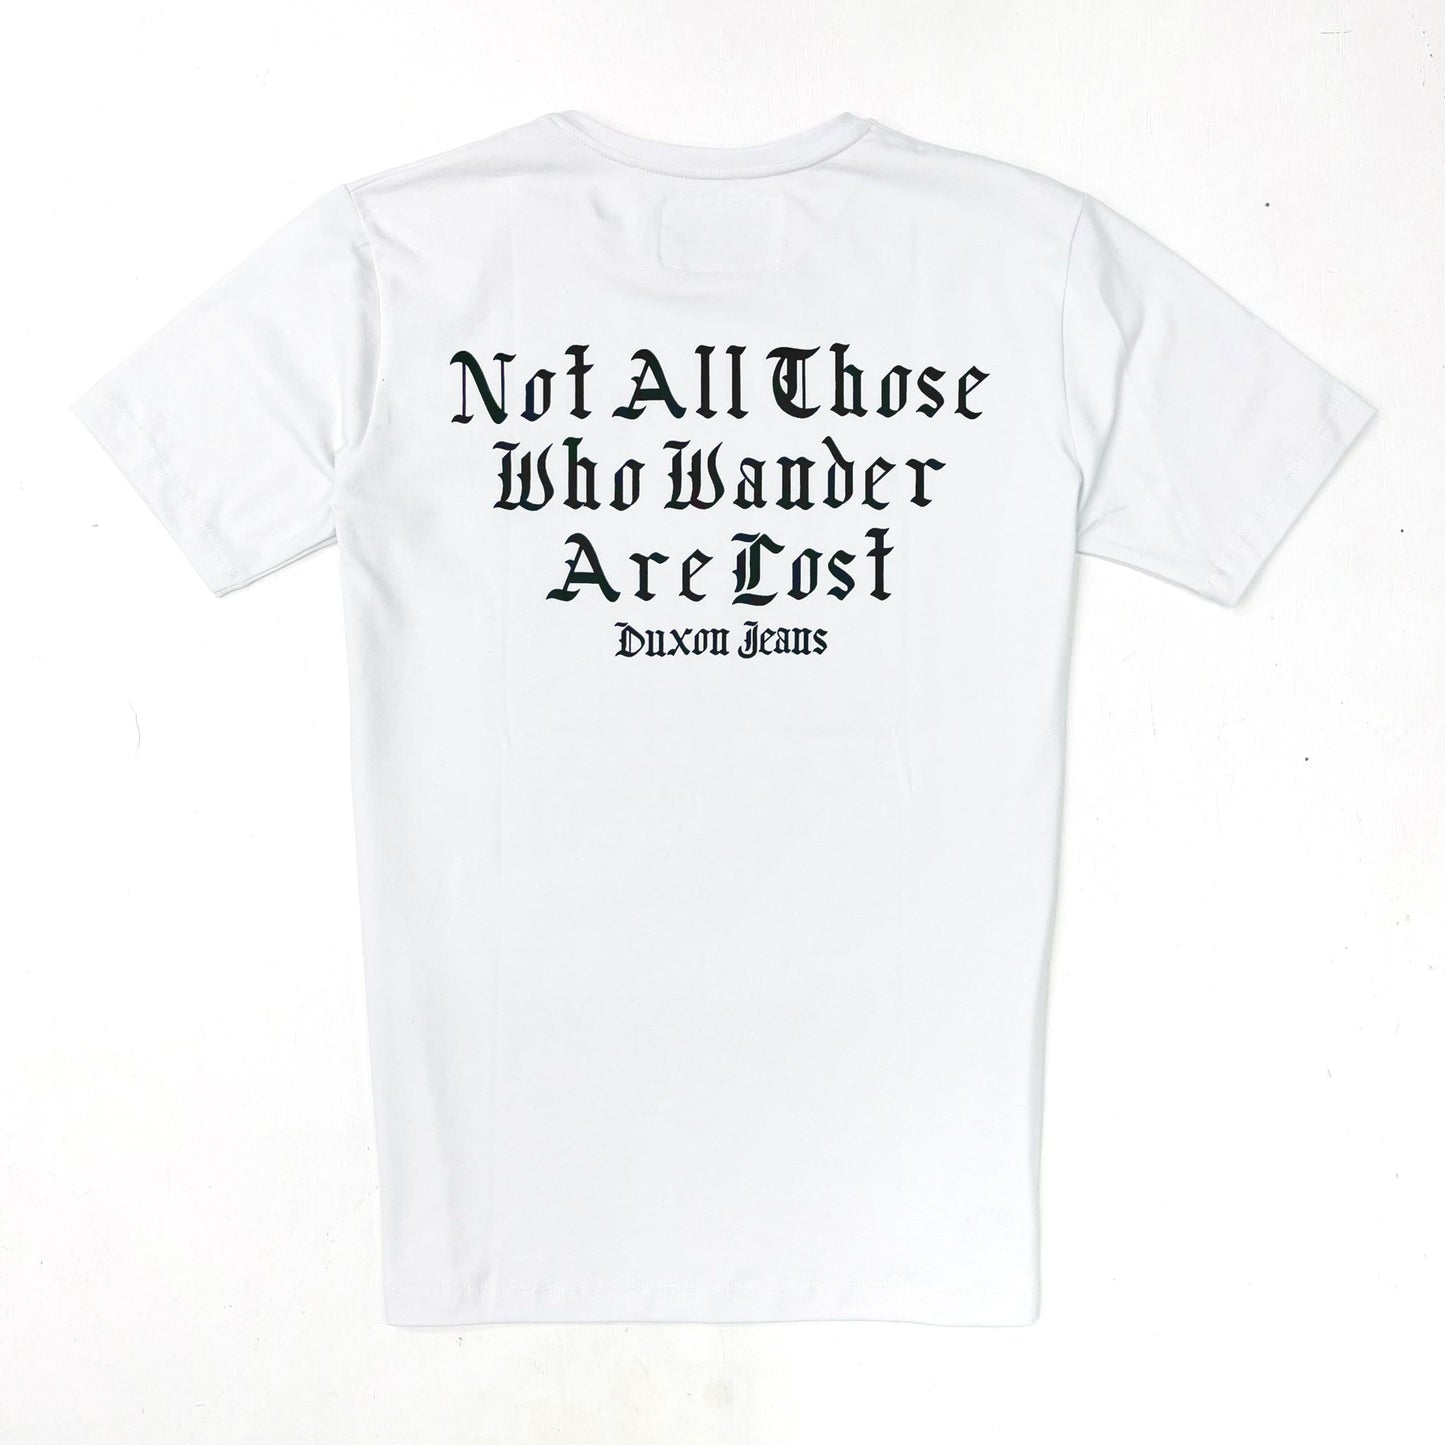 REMERA NOT ALL THOSE WHO WANDER ARE LOST BLANCA DOBLE ESTAMPA